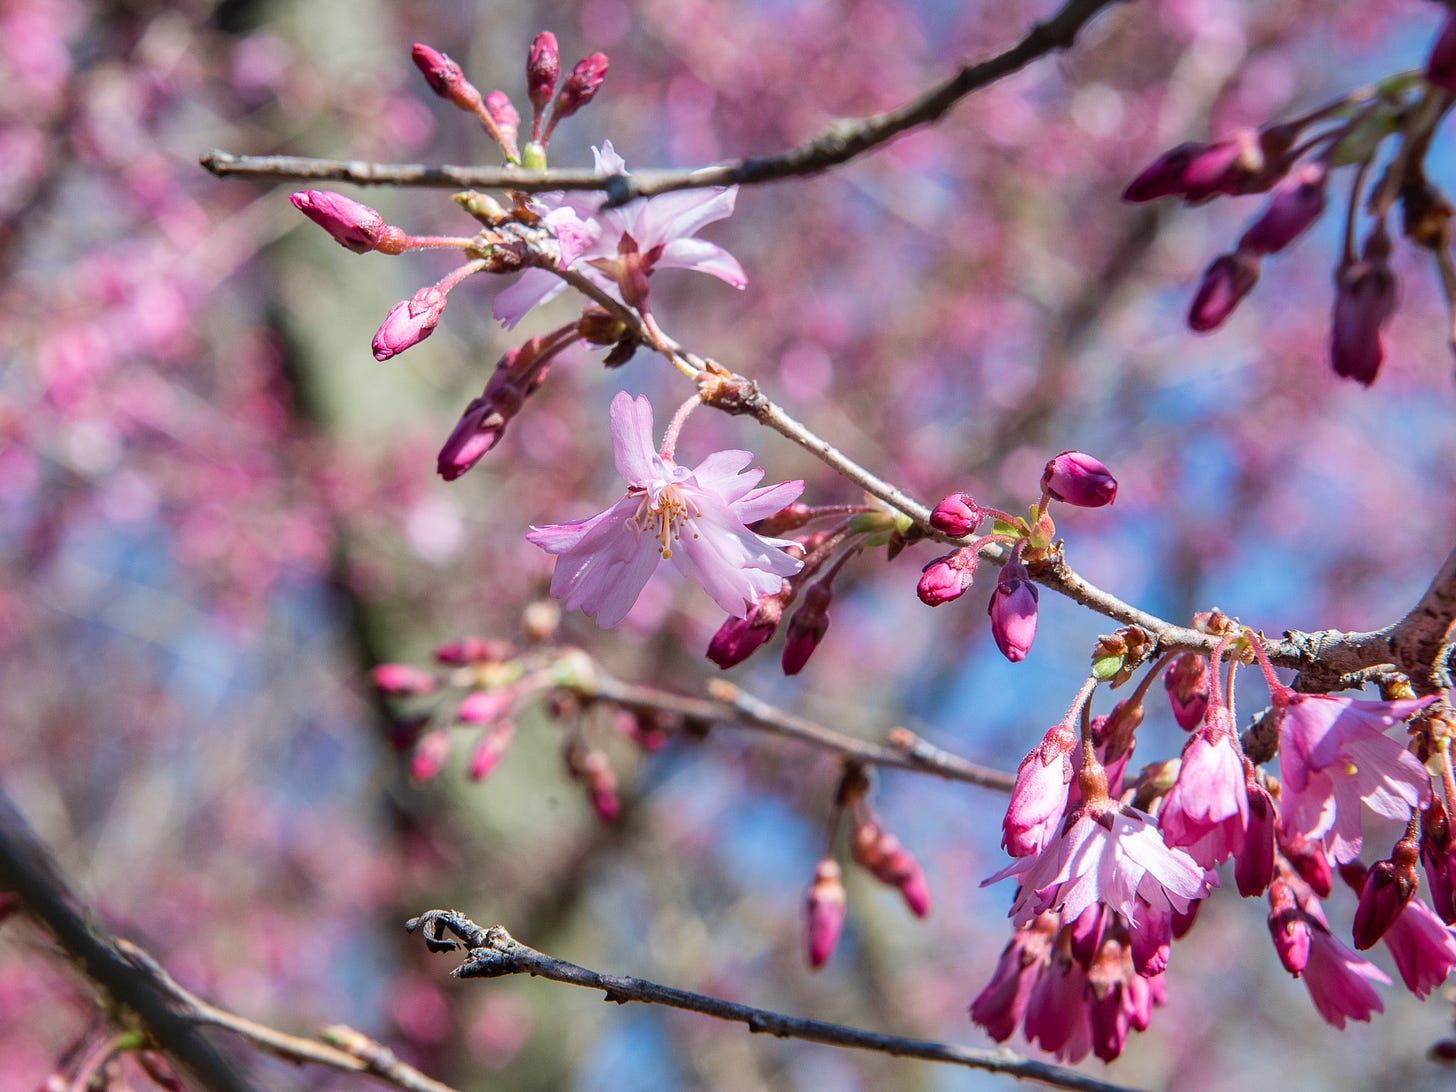 ID: Up close photo of bright pink cherry blossoms just starting to bloom